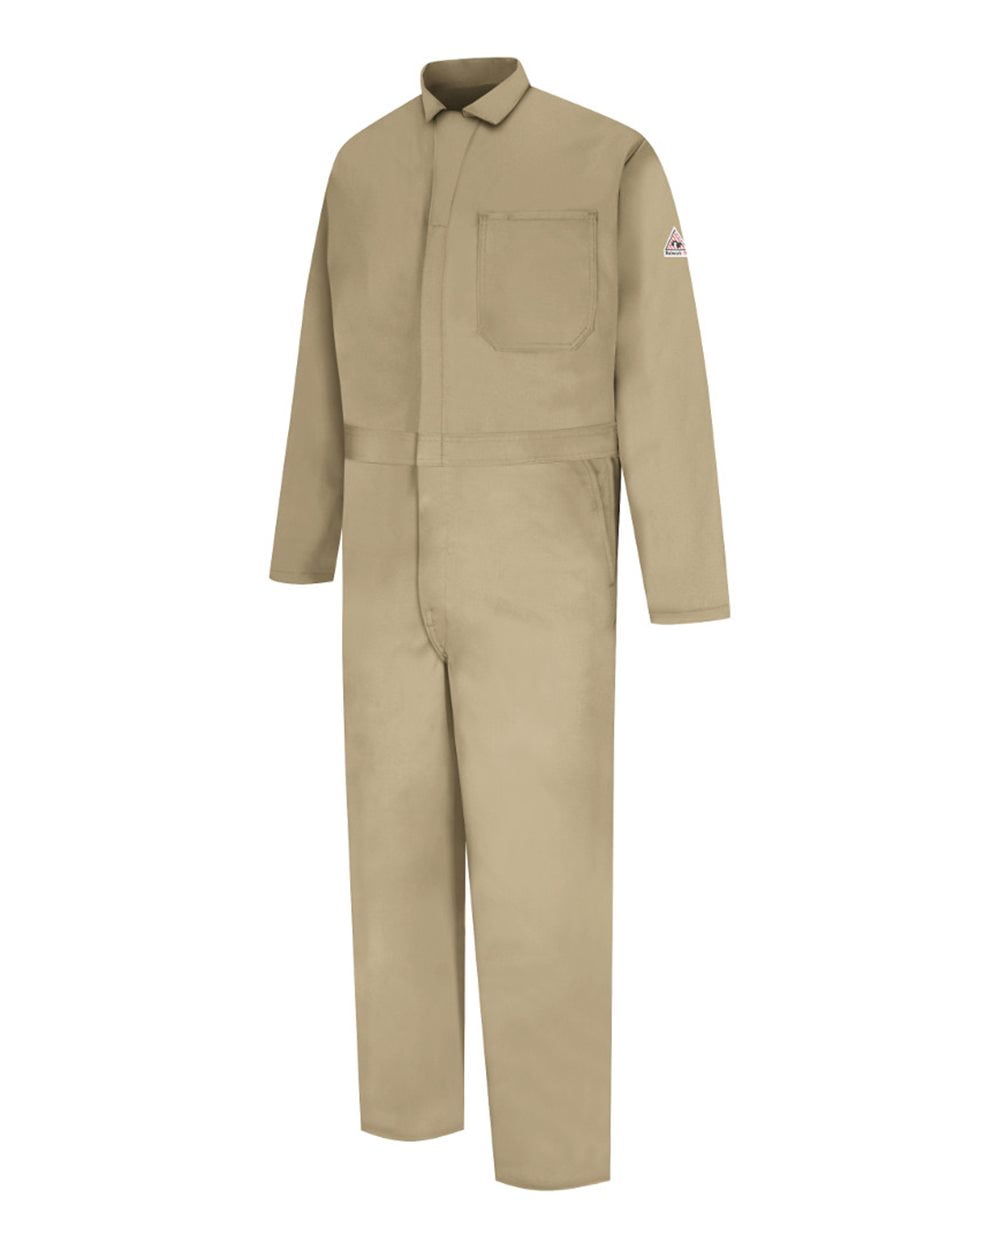 Maroon Flame Fire Retardant Resistant Welder Boilersuit Coverall Overall New 